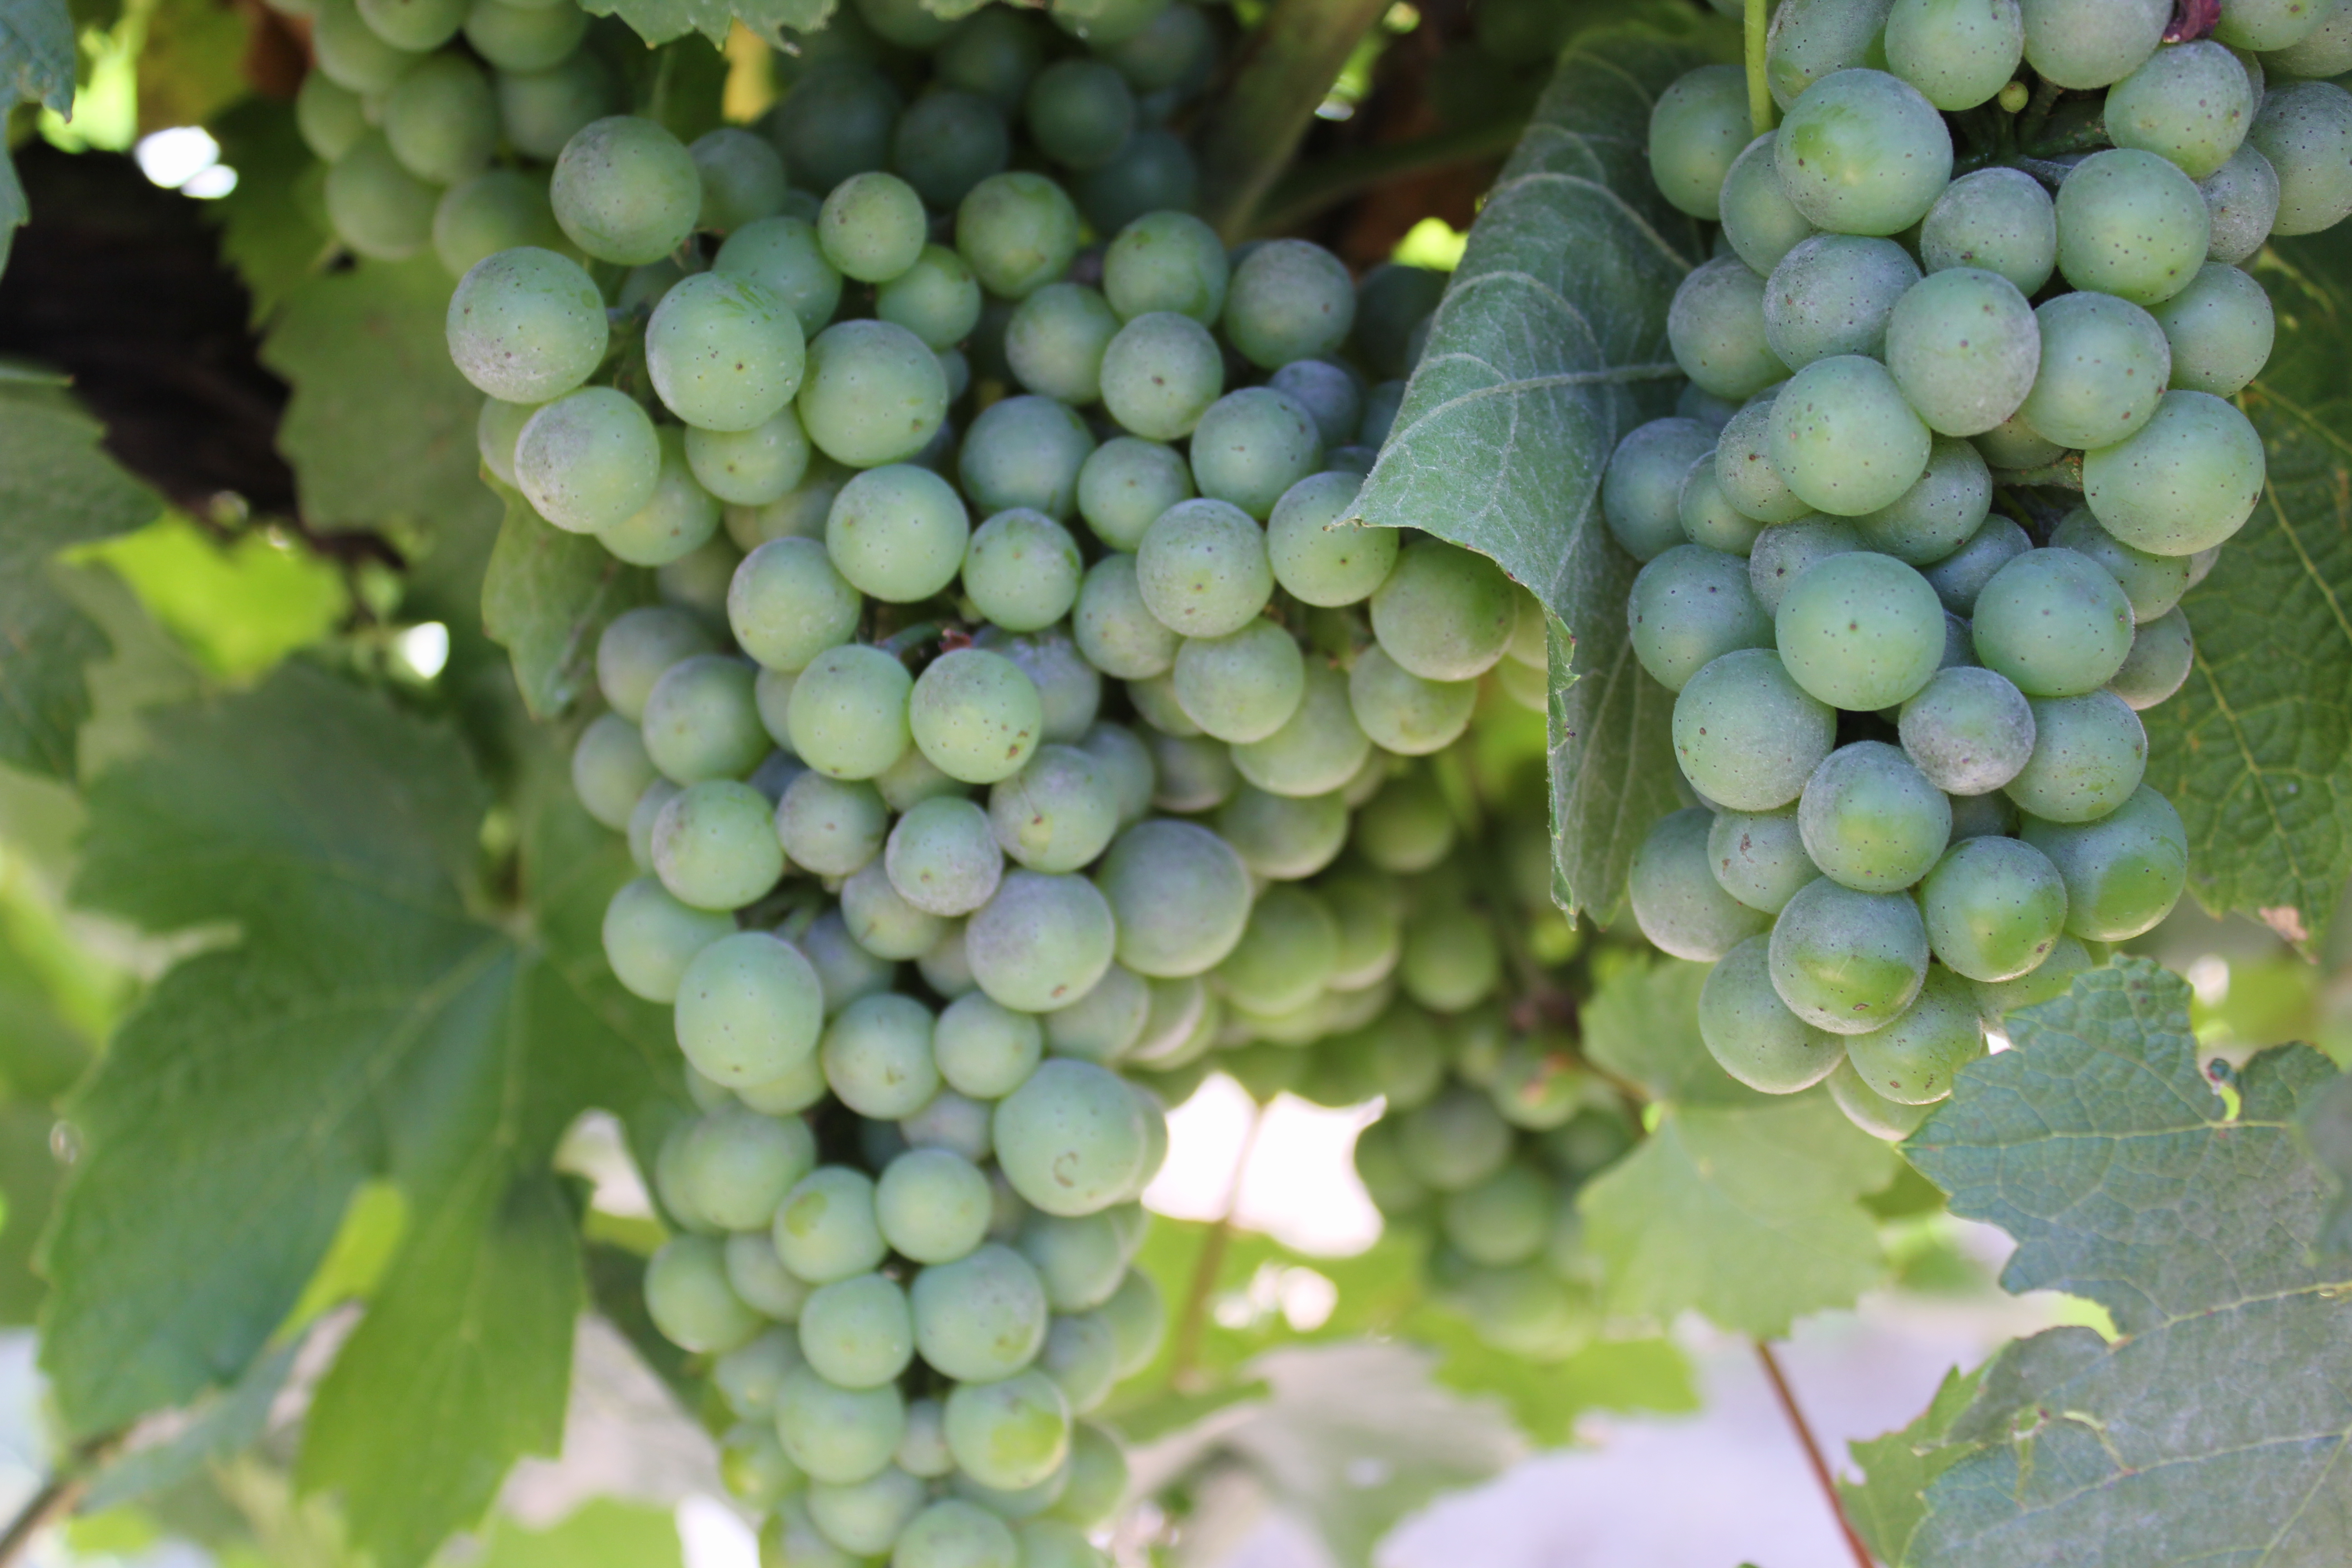 New BASF biological fungicide offers flexibility in grape